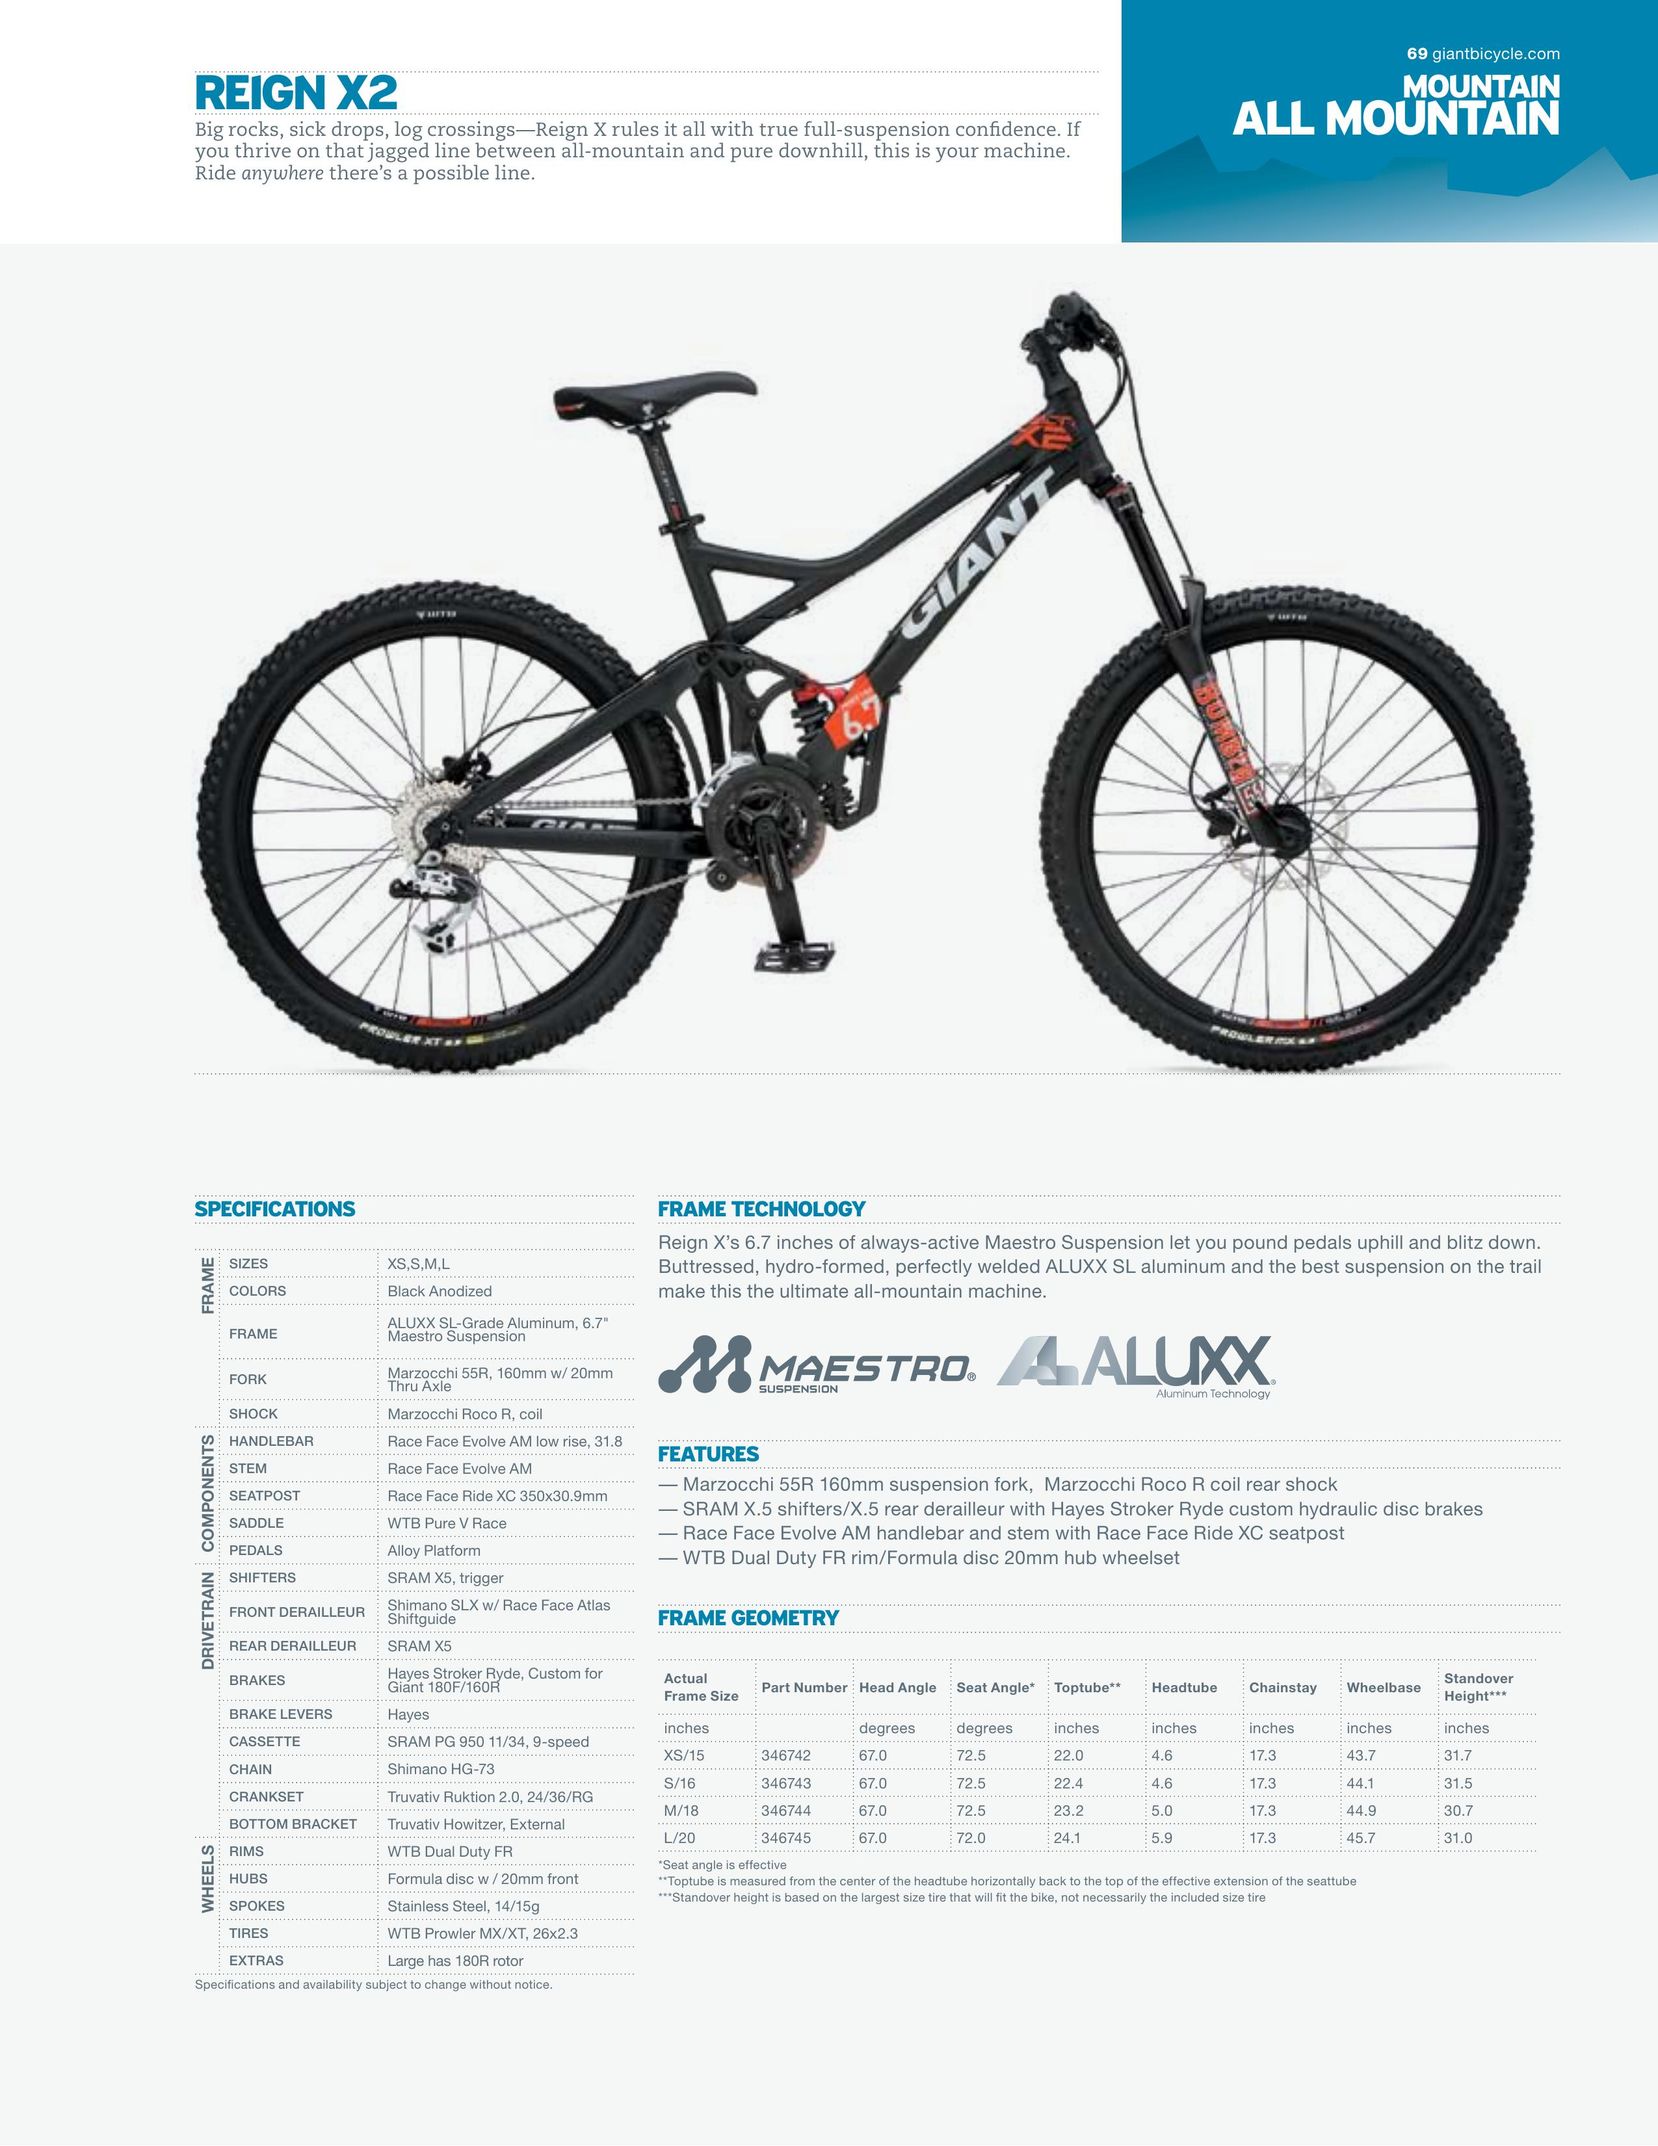 Giant REIGN X2 Bicycle User Manual